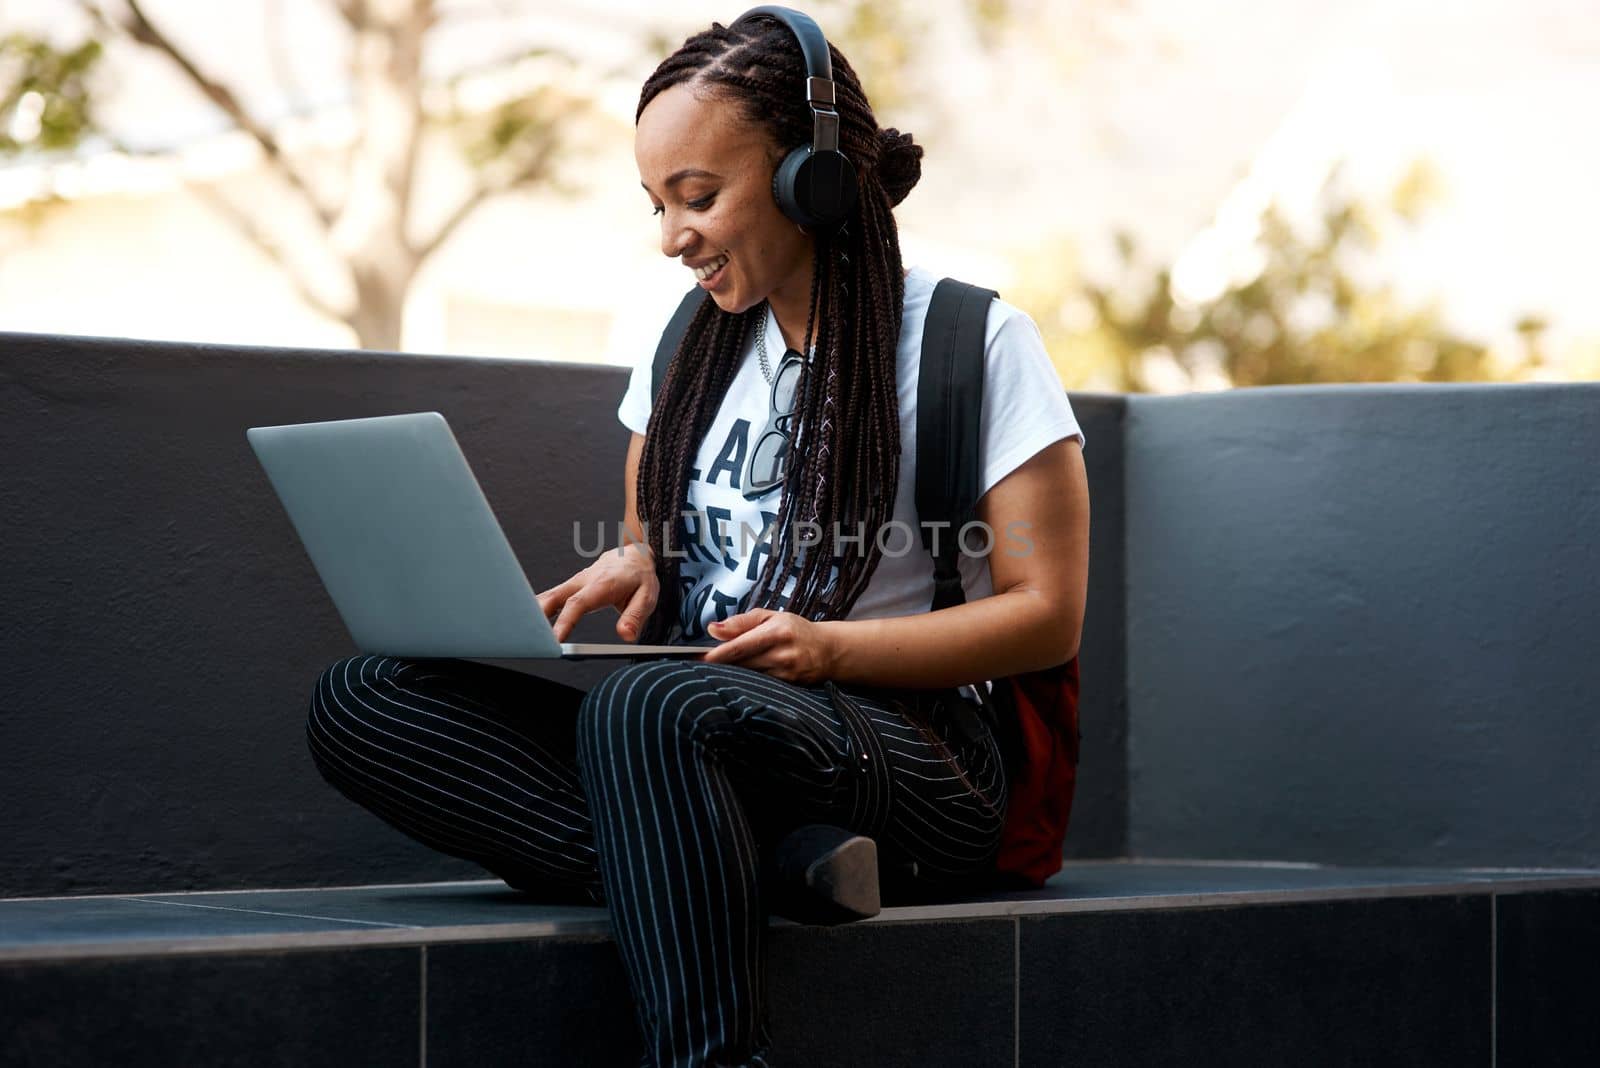 Blogging outdoors is always fun. an attractive young woman listening to music and using her laptop while relaxing outdoors. by YuriArcurs